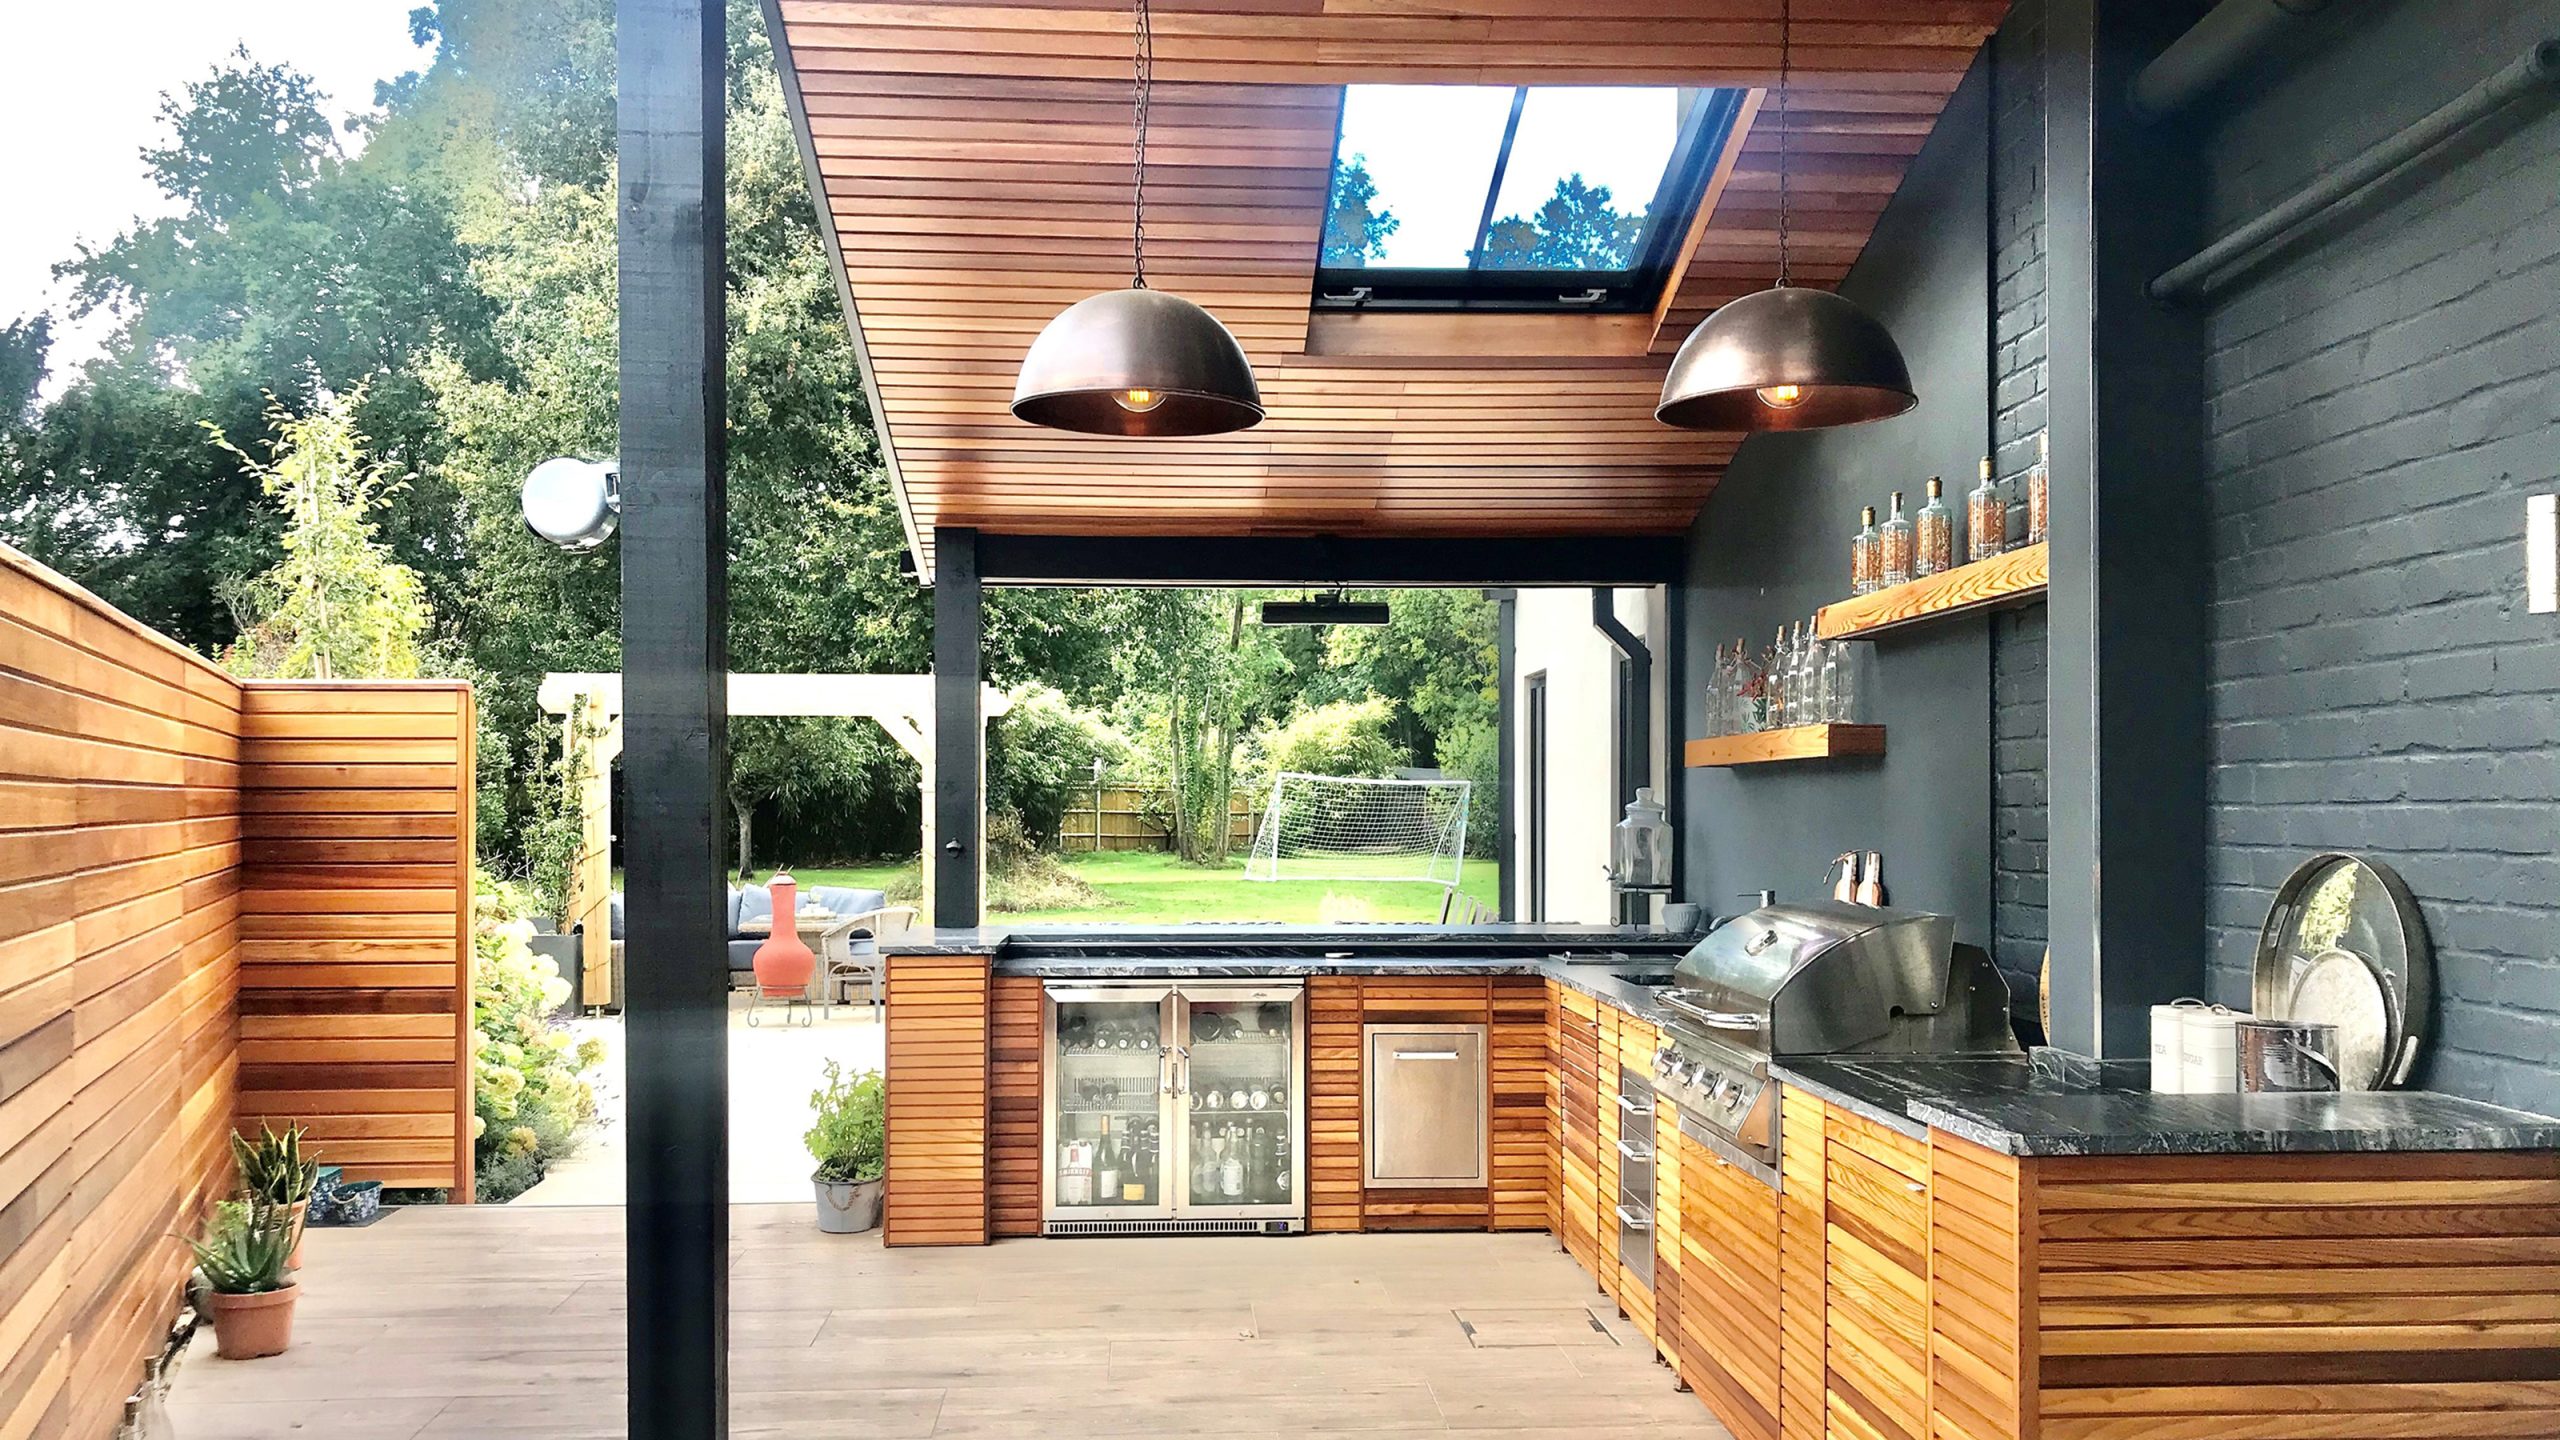 What Is The Purpose Of An Outdoor Kitchen